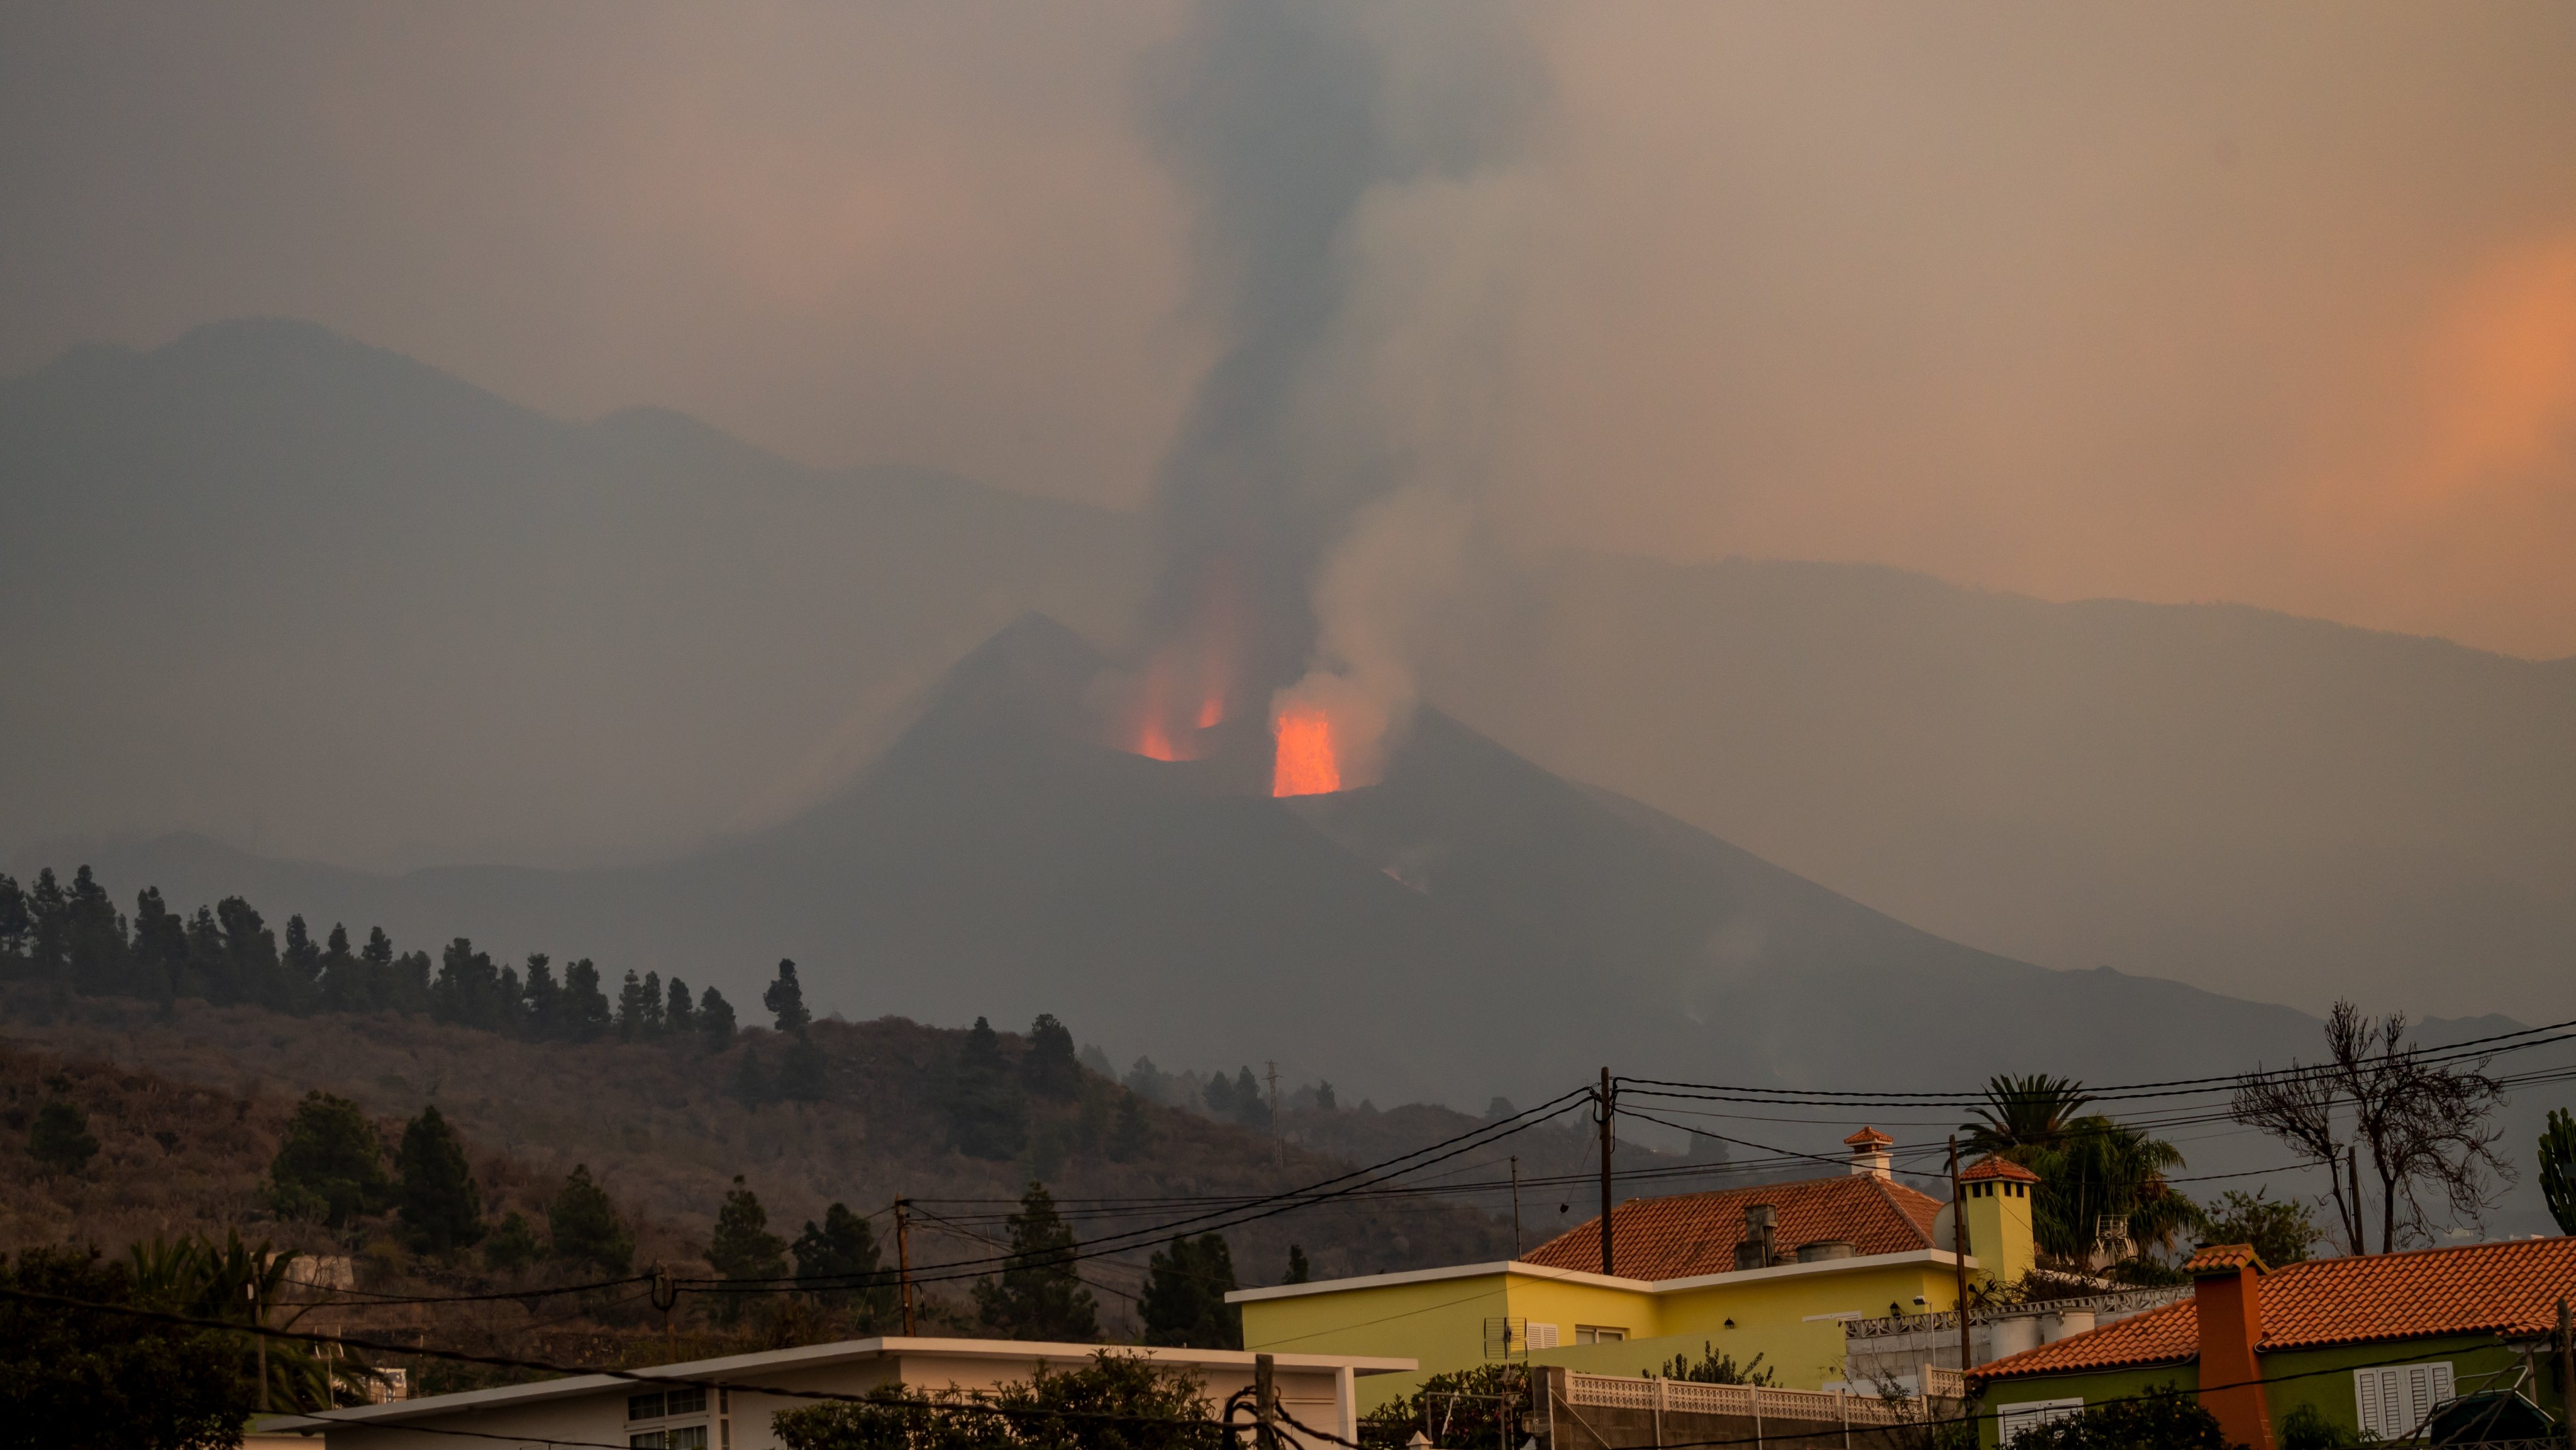 Volcanic Ash And New Eruptions Grounds Flights On Spain&#039;s Canary Island Of La Palma